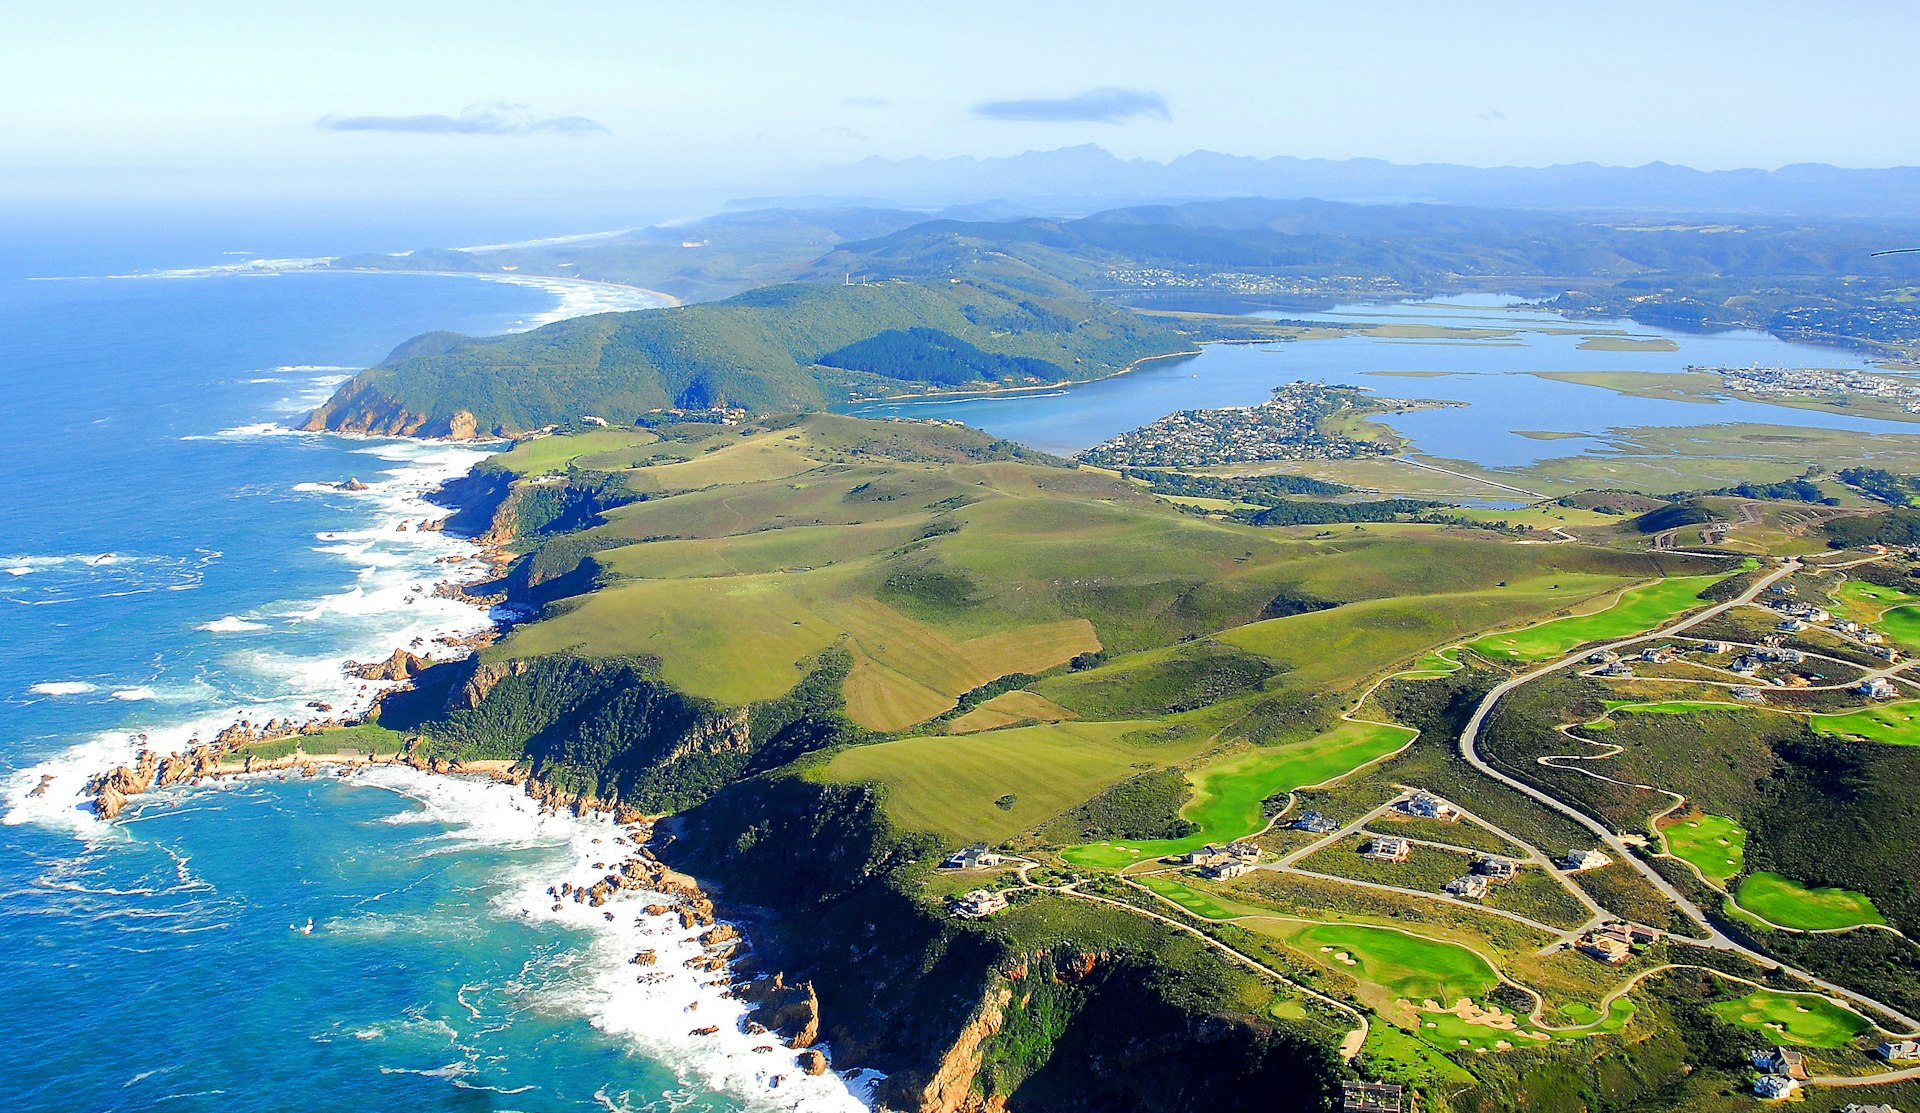 Aerial view of lush green fields and coastline in Knysna on the Garden Route, South Africa